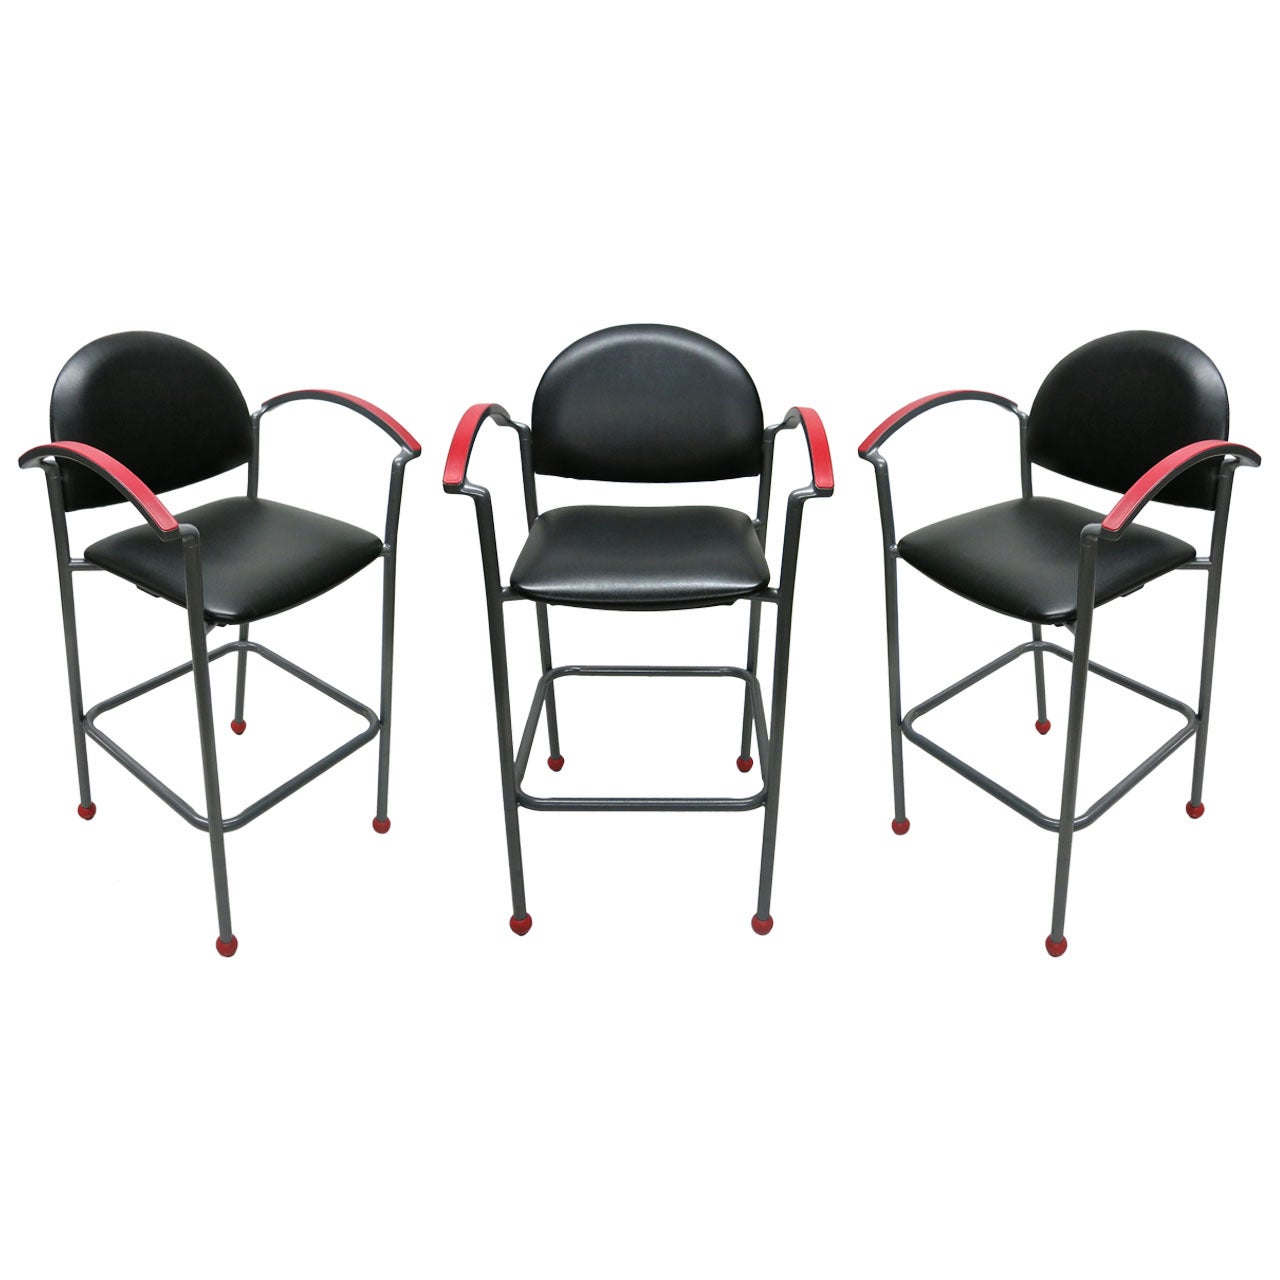 3 Barstools by Ron Kemnitzer for Fixtures Furniture USA